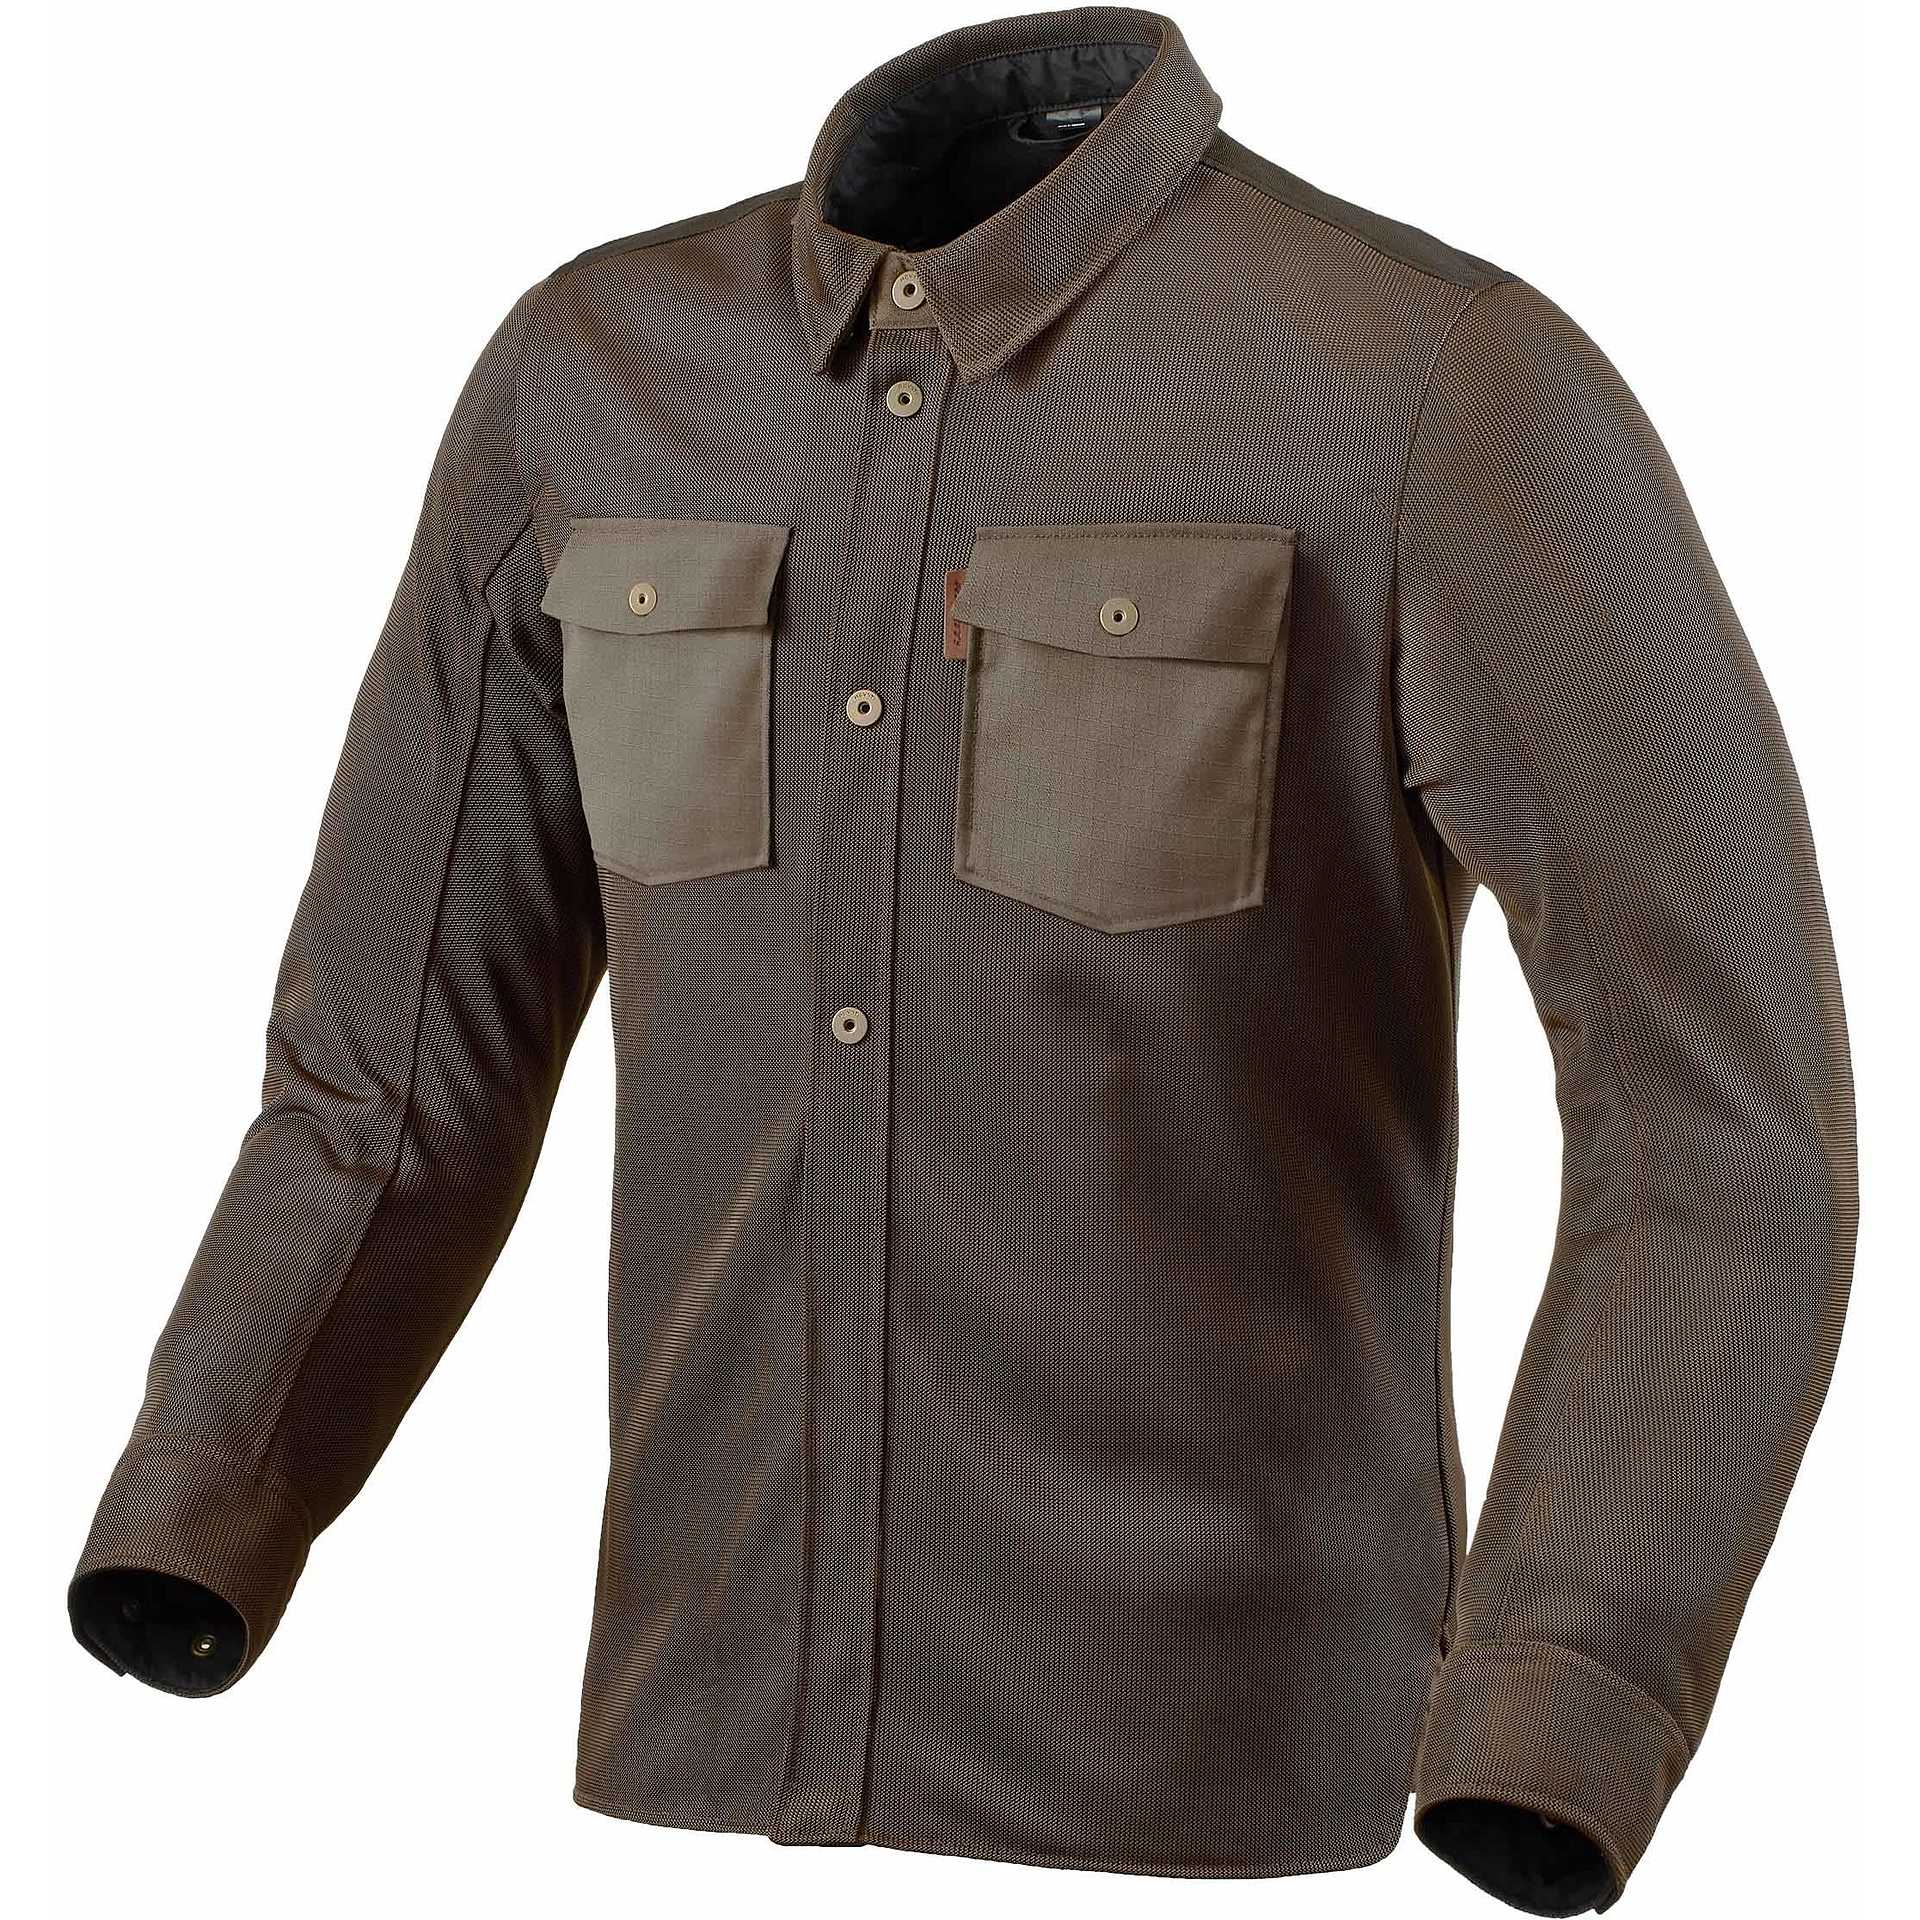 Image of REV'IT! Overshirt Tracer Air 2 Jacket Brown Size S ID 8700001317092